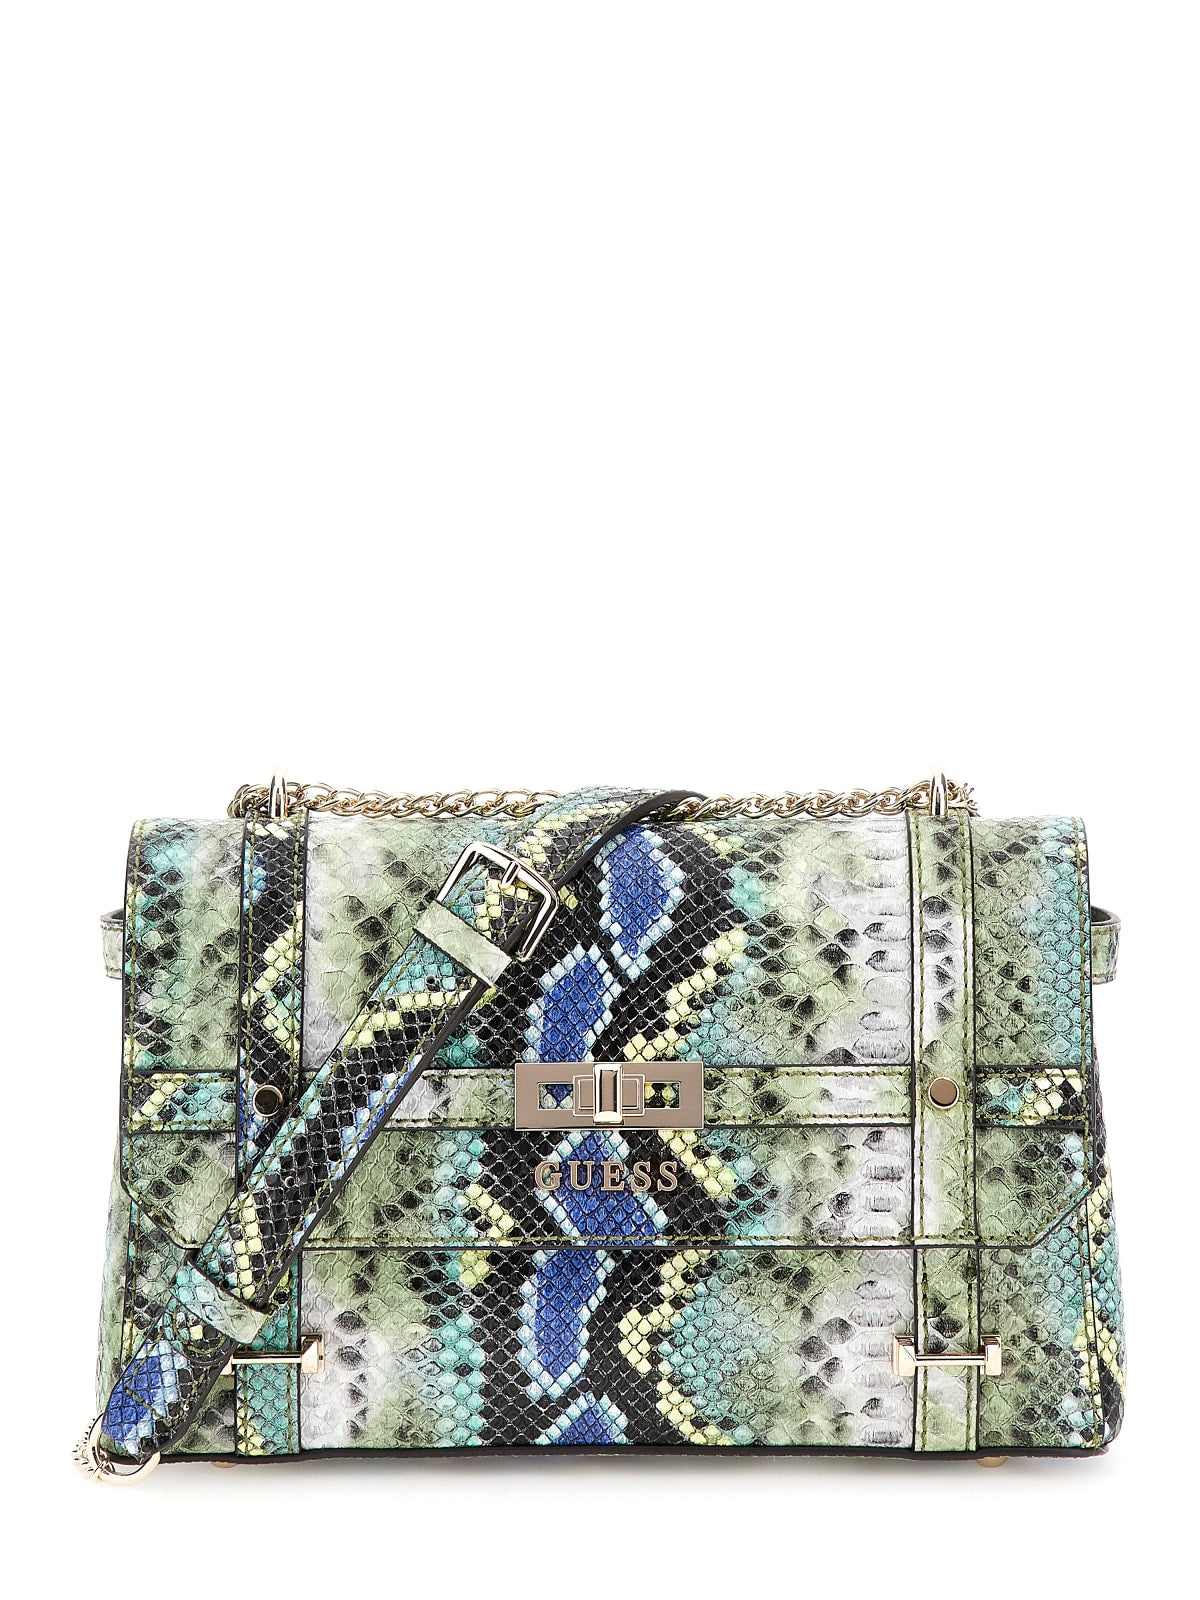 Guess Emilee Convertible X Flap Bag Turquoise Multi KX886221